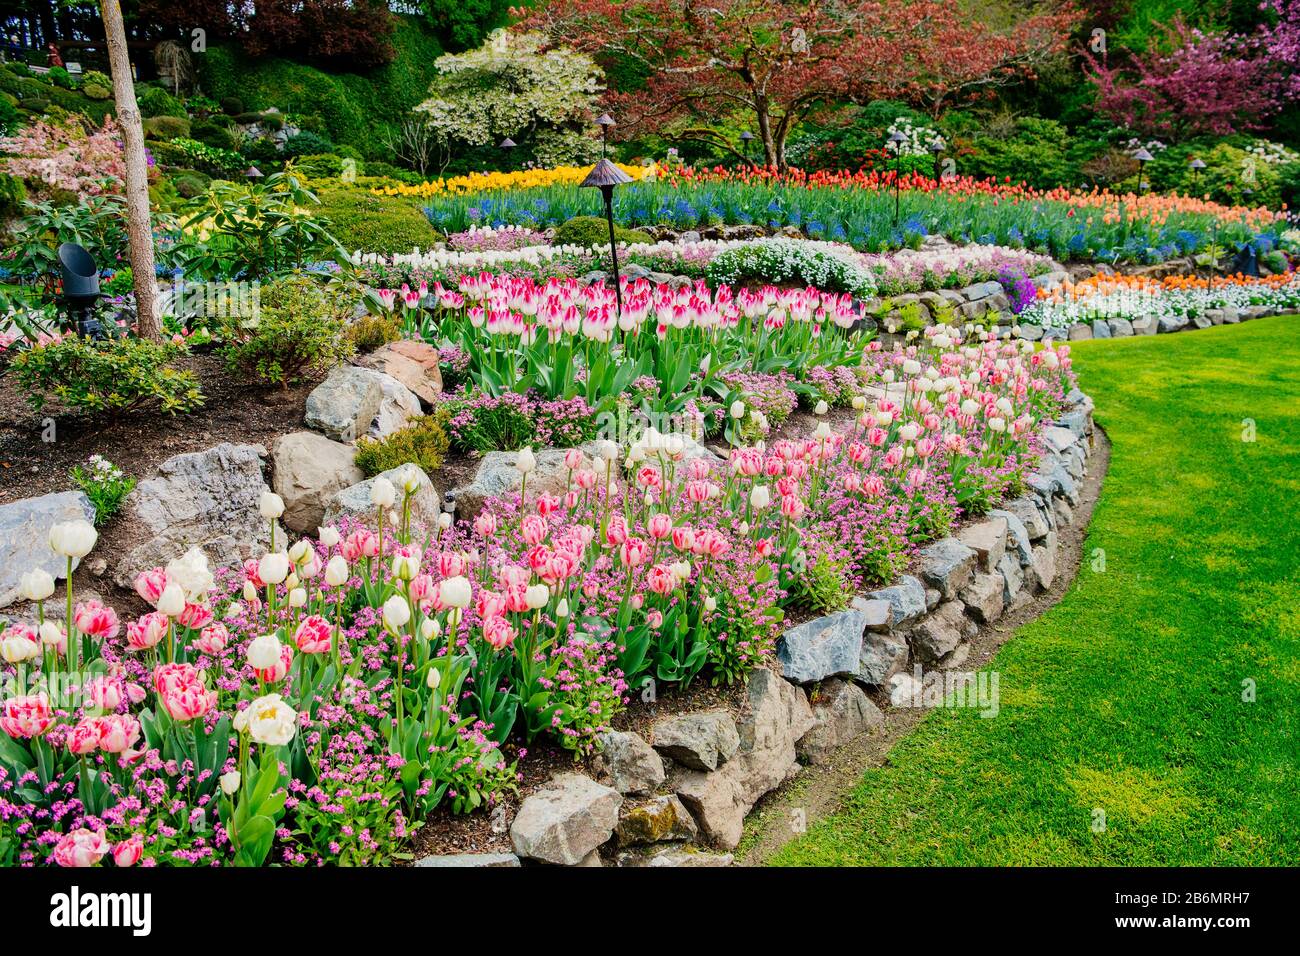 Landscape with colorful flowers in formal garden, Butchart Gardens, Vancouver Island, British Columbia, Canada Stock Photo